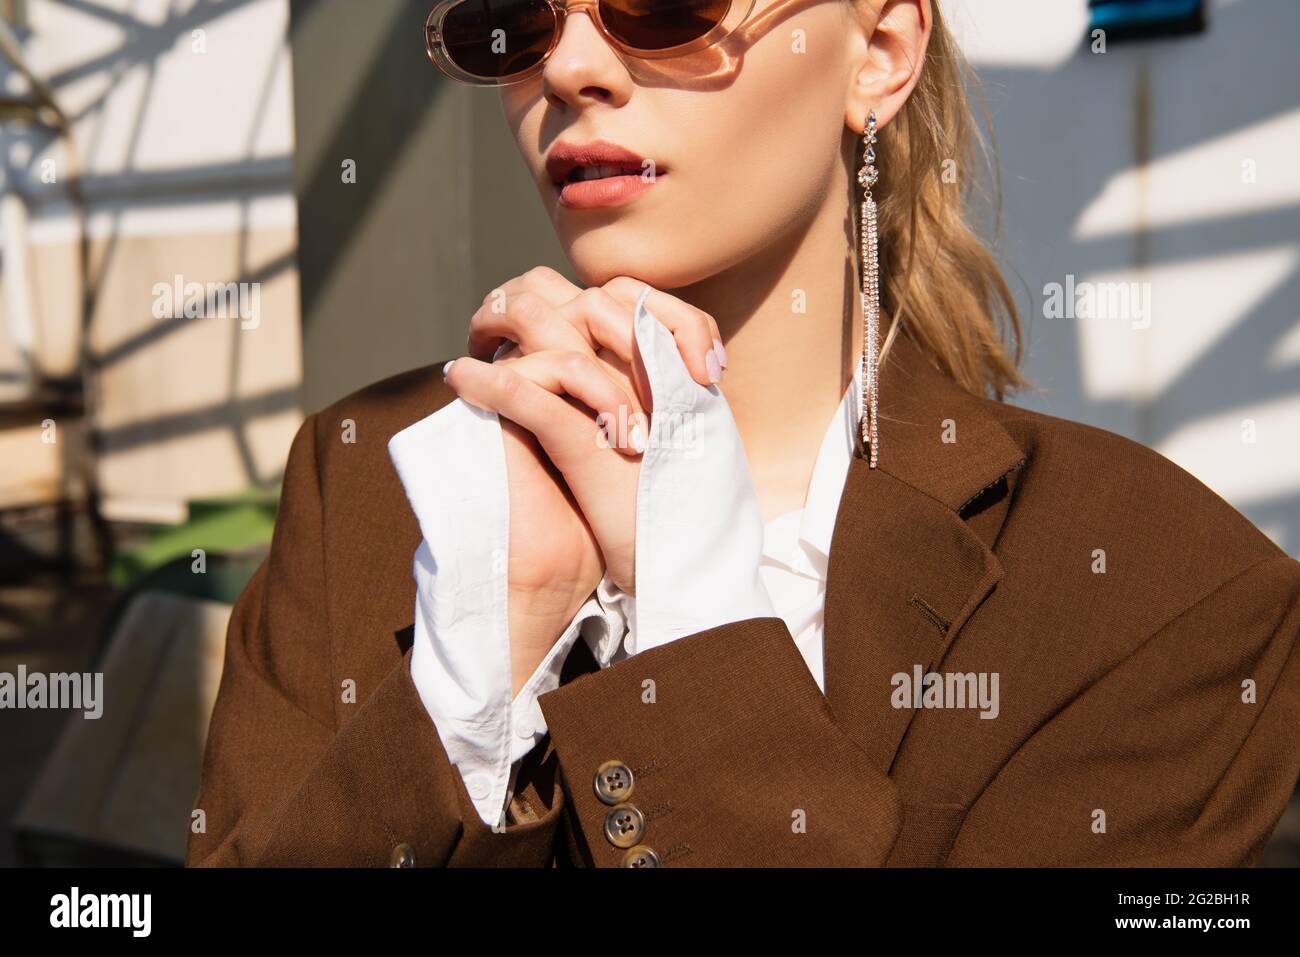 young model with earring and sunglasses posing with clenched hands Stock Photo